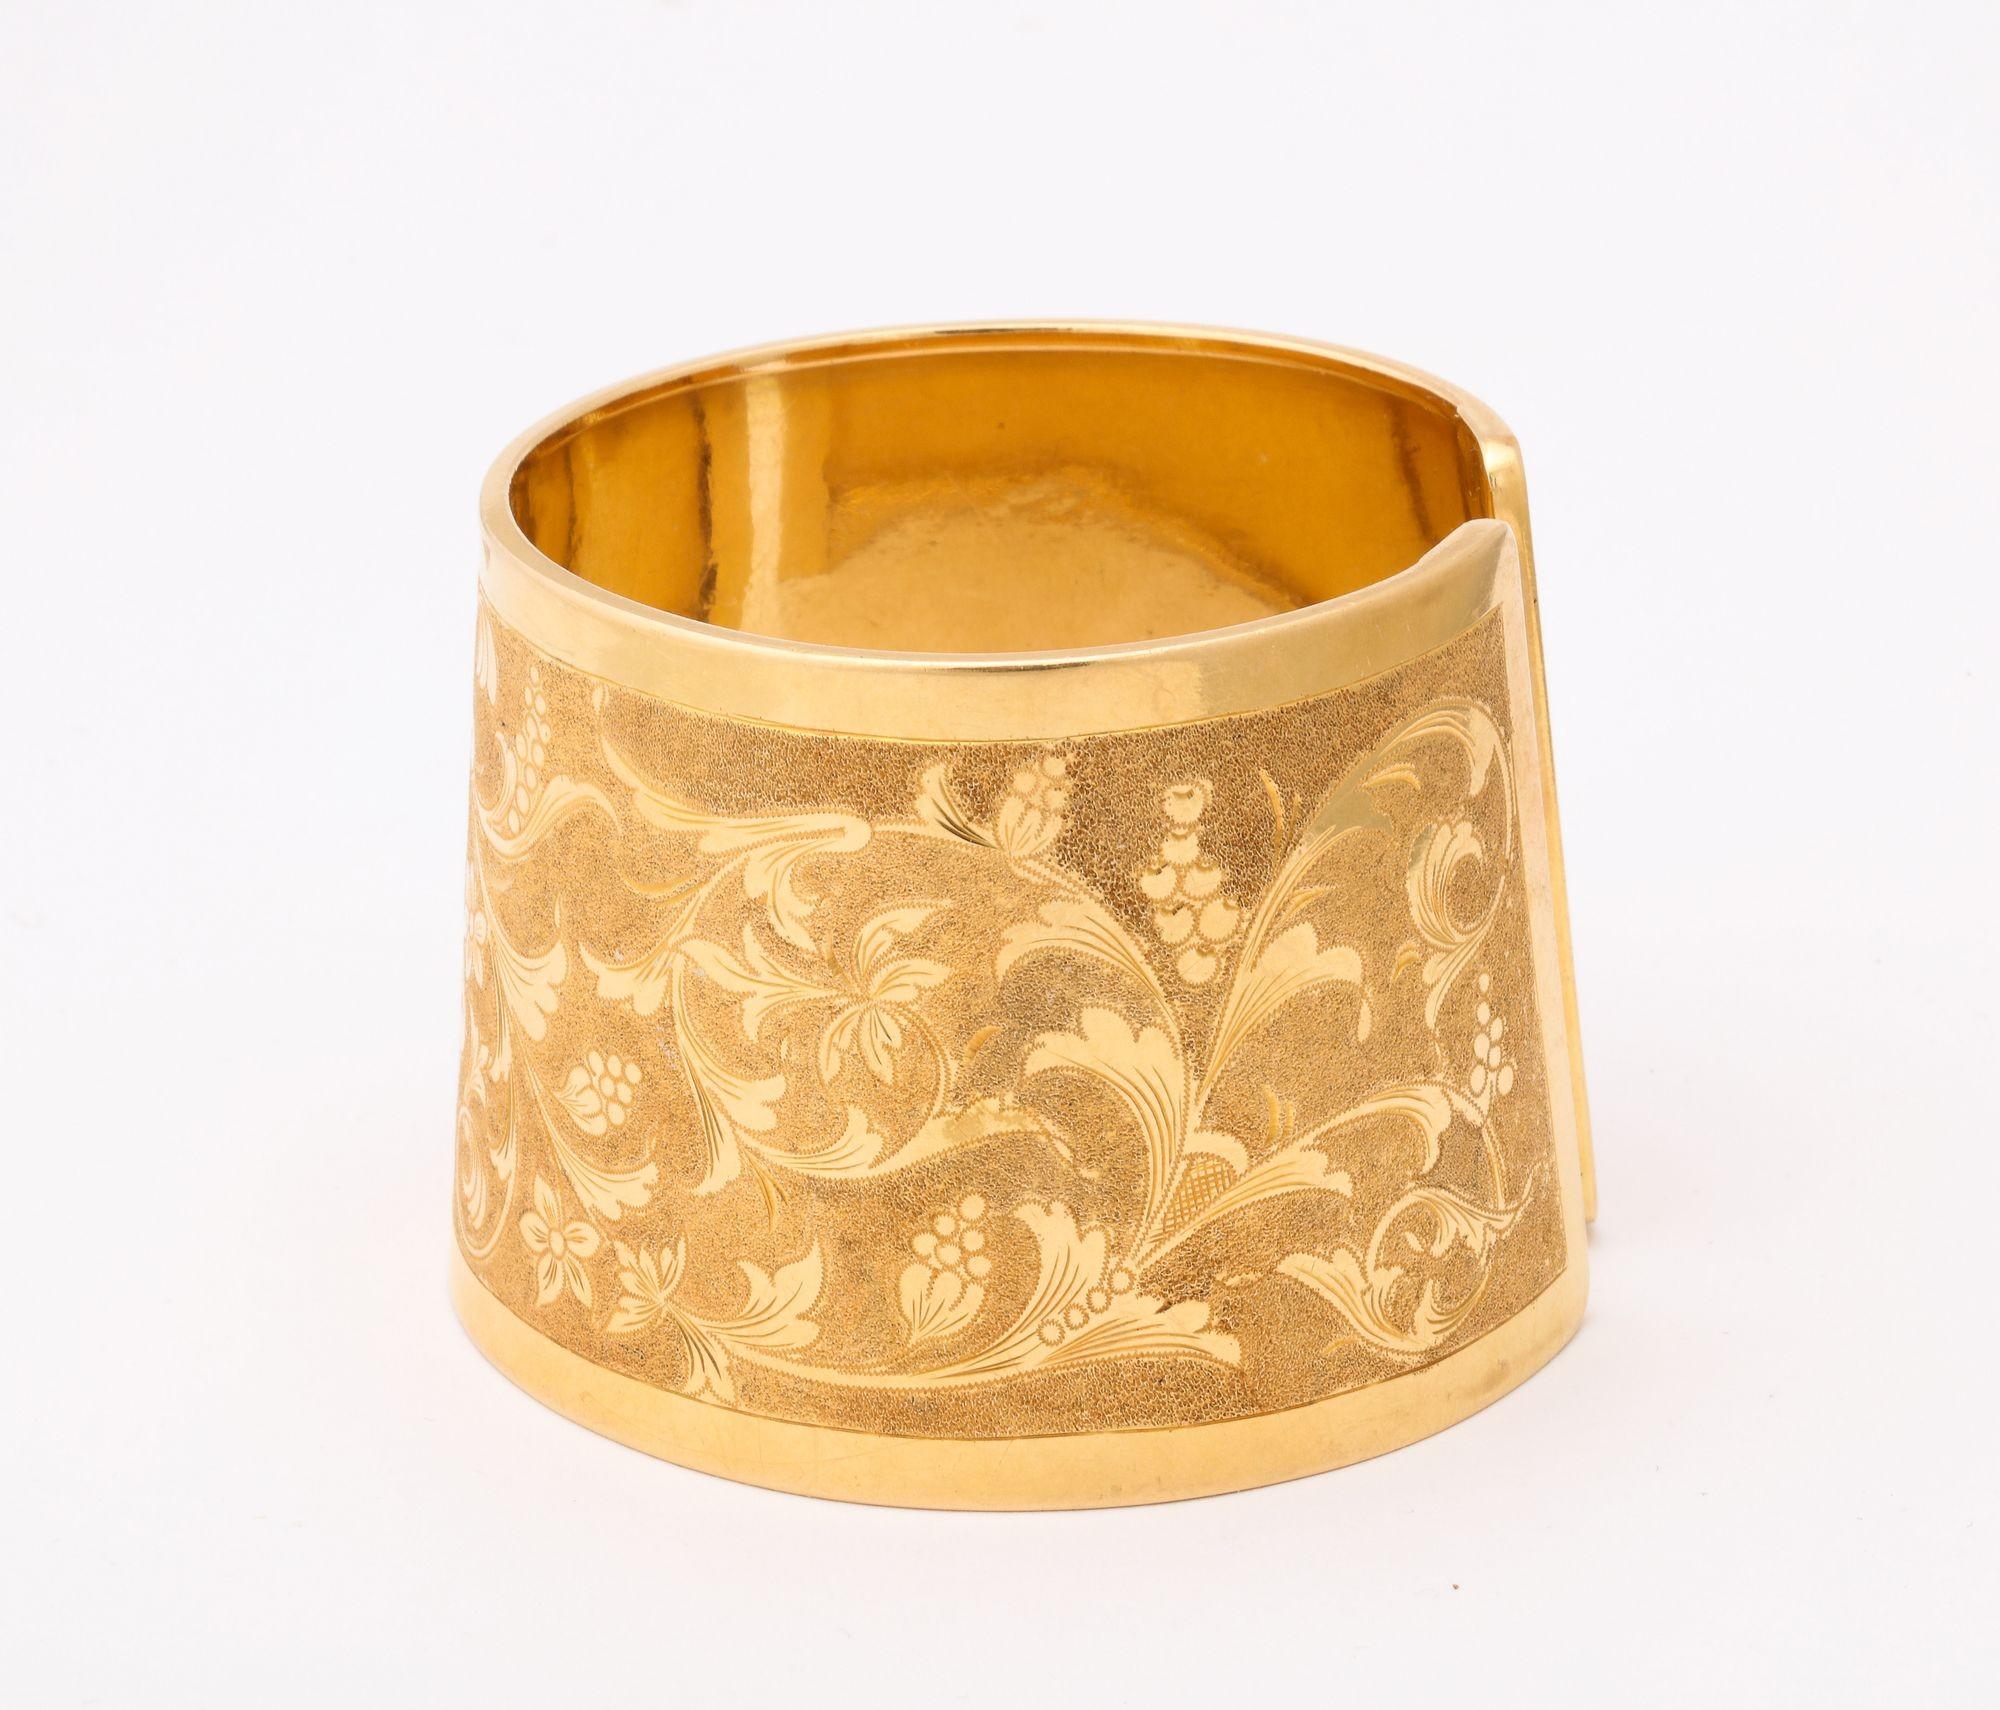 Italian Classical  Engraved Cuff With Two Tone Gold In Good Condition For Sale In New York, NY